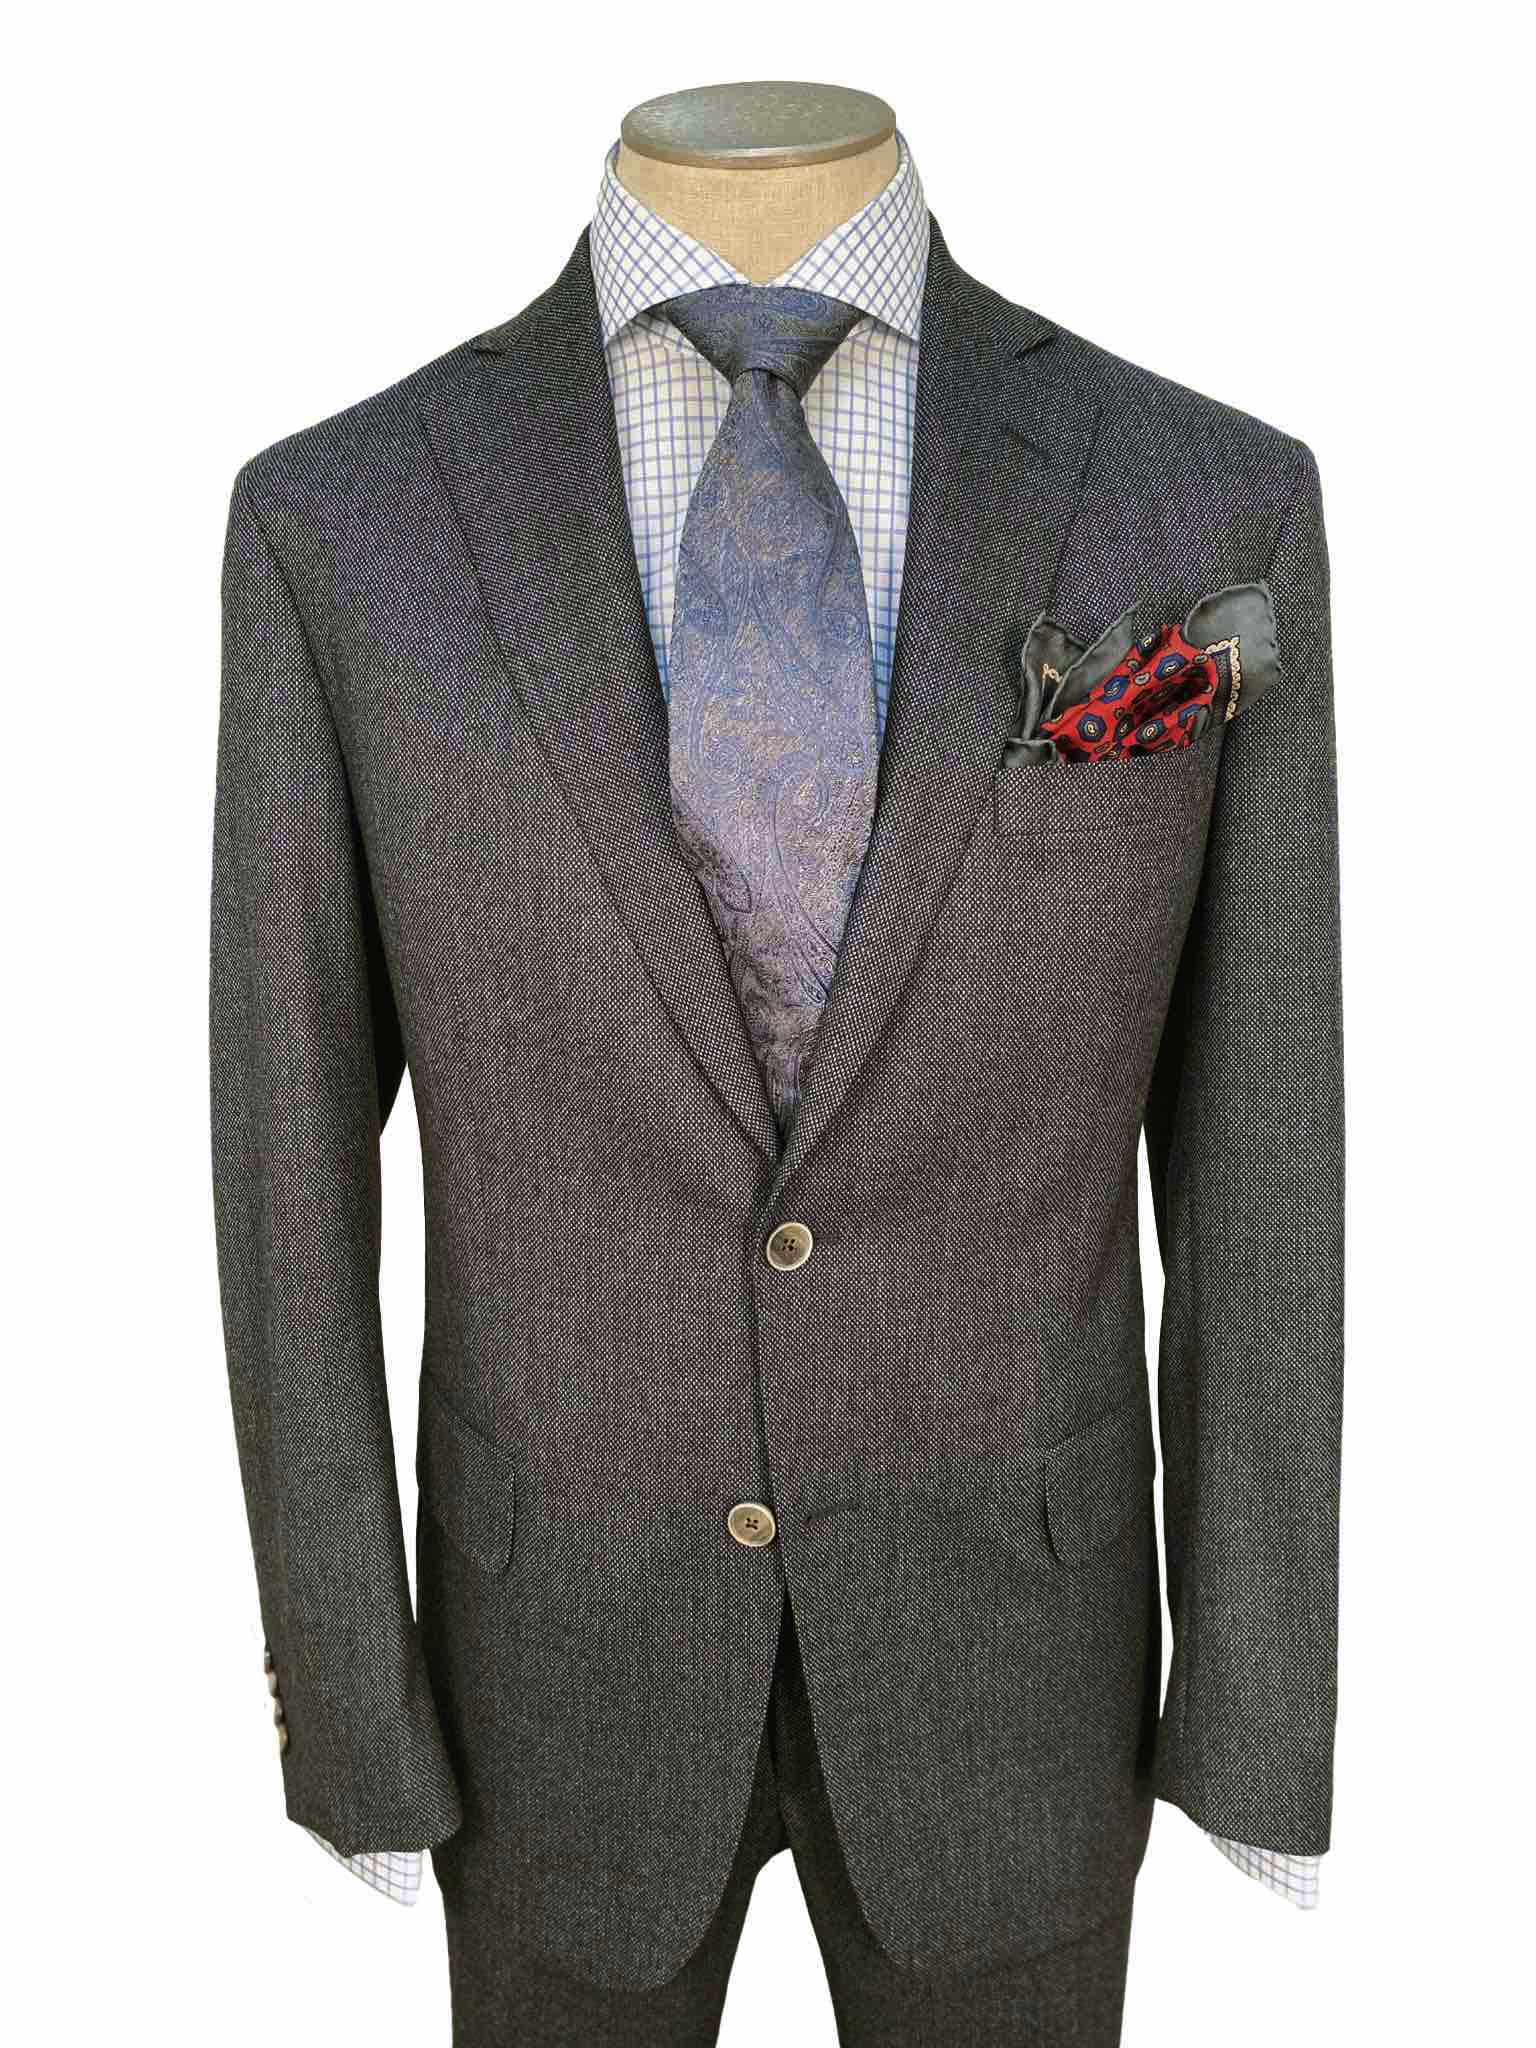 Men's Flat Front Pant Nested Suit Modern Cut - GREY - 100% WOOL